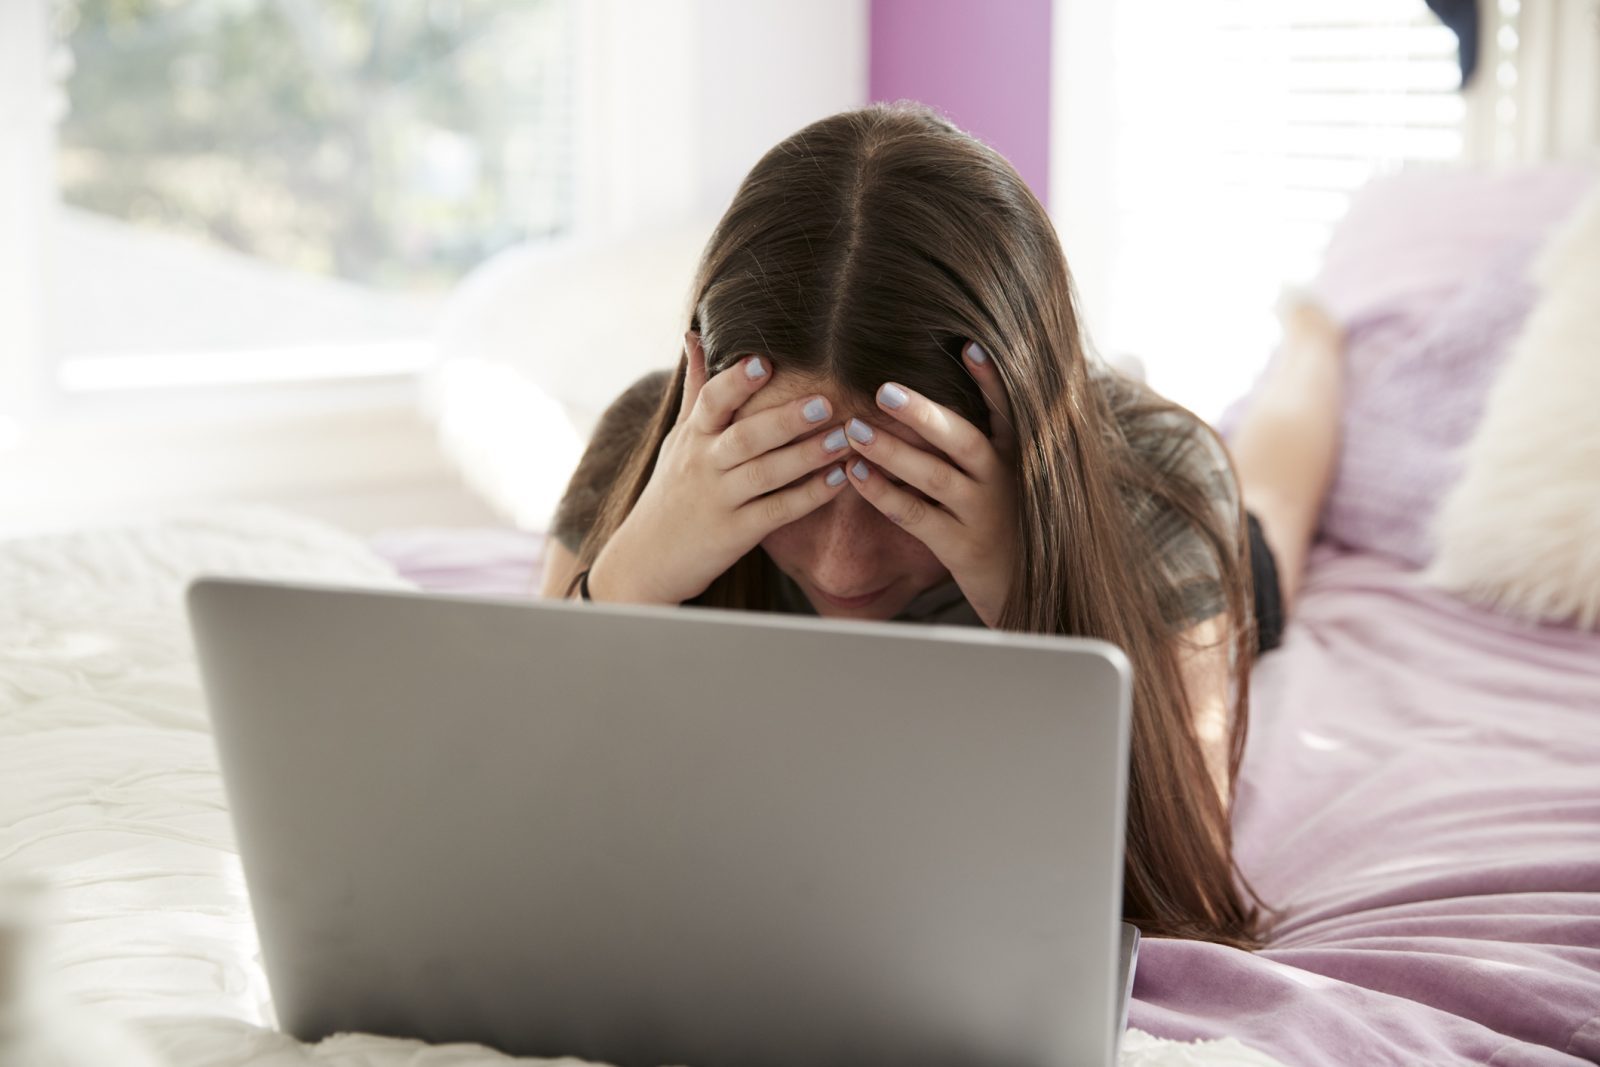 A girl sits with her head in her hands behind a laptop.